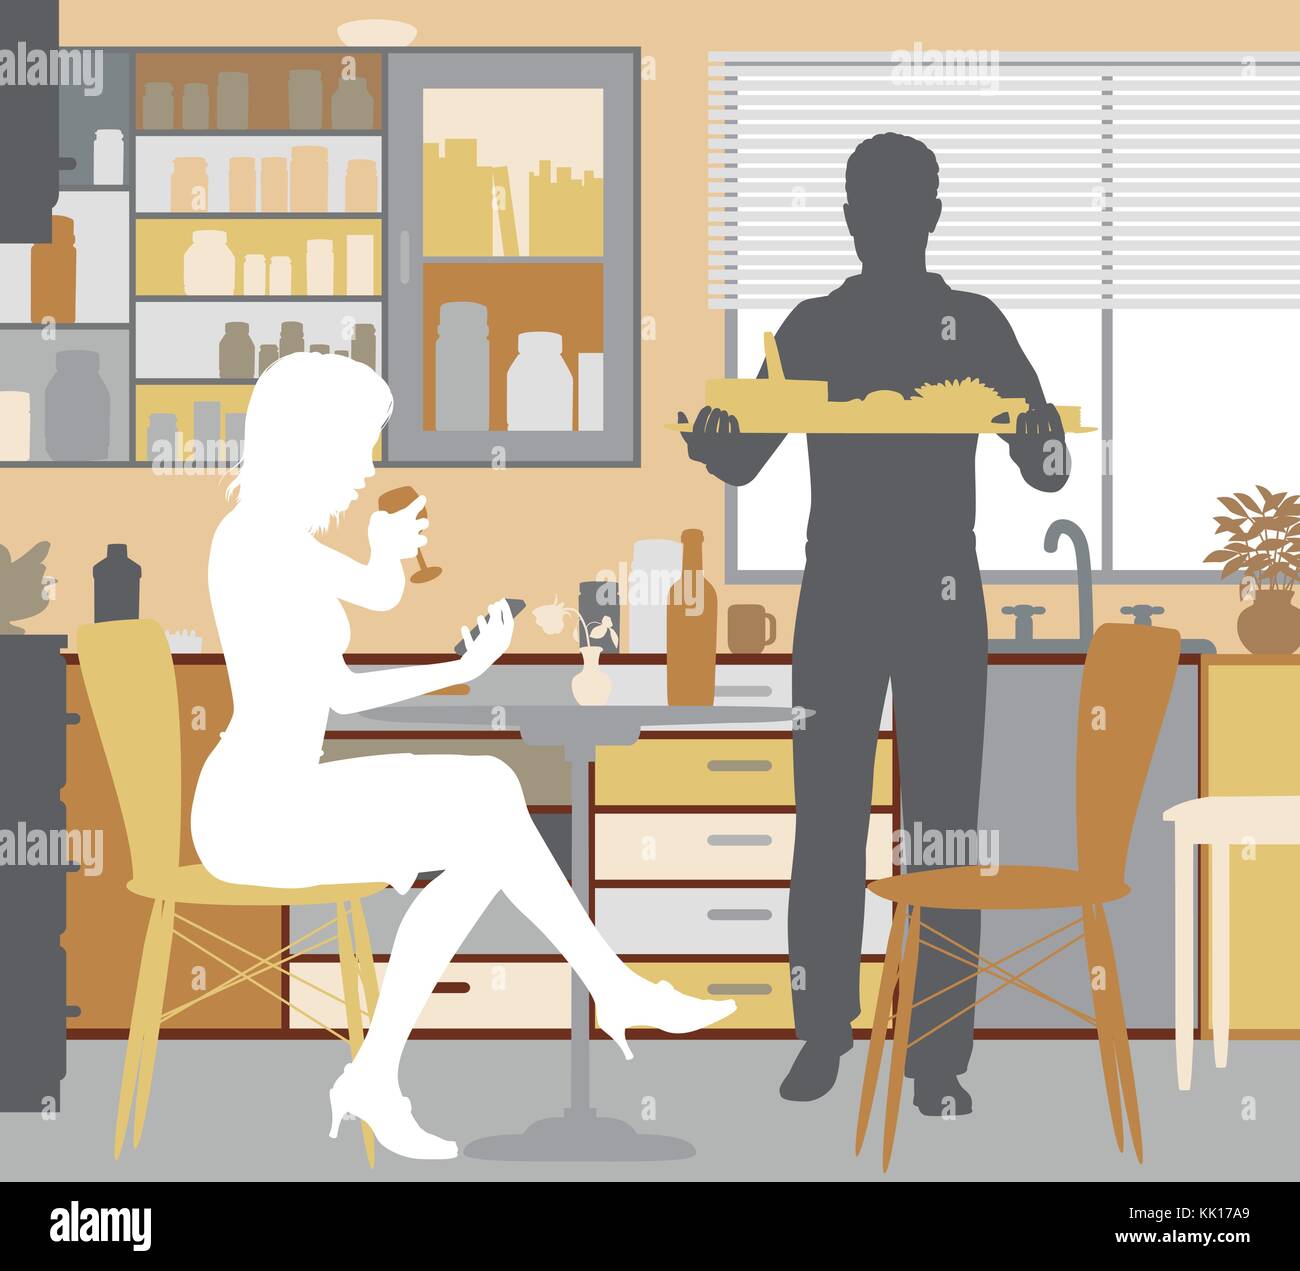 Editable vector illustration of a woman being served food by a man at home Stock Vector